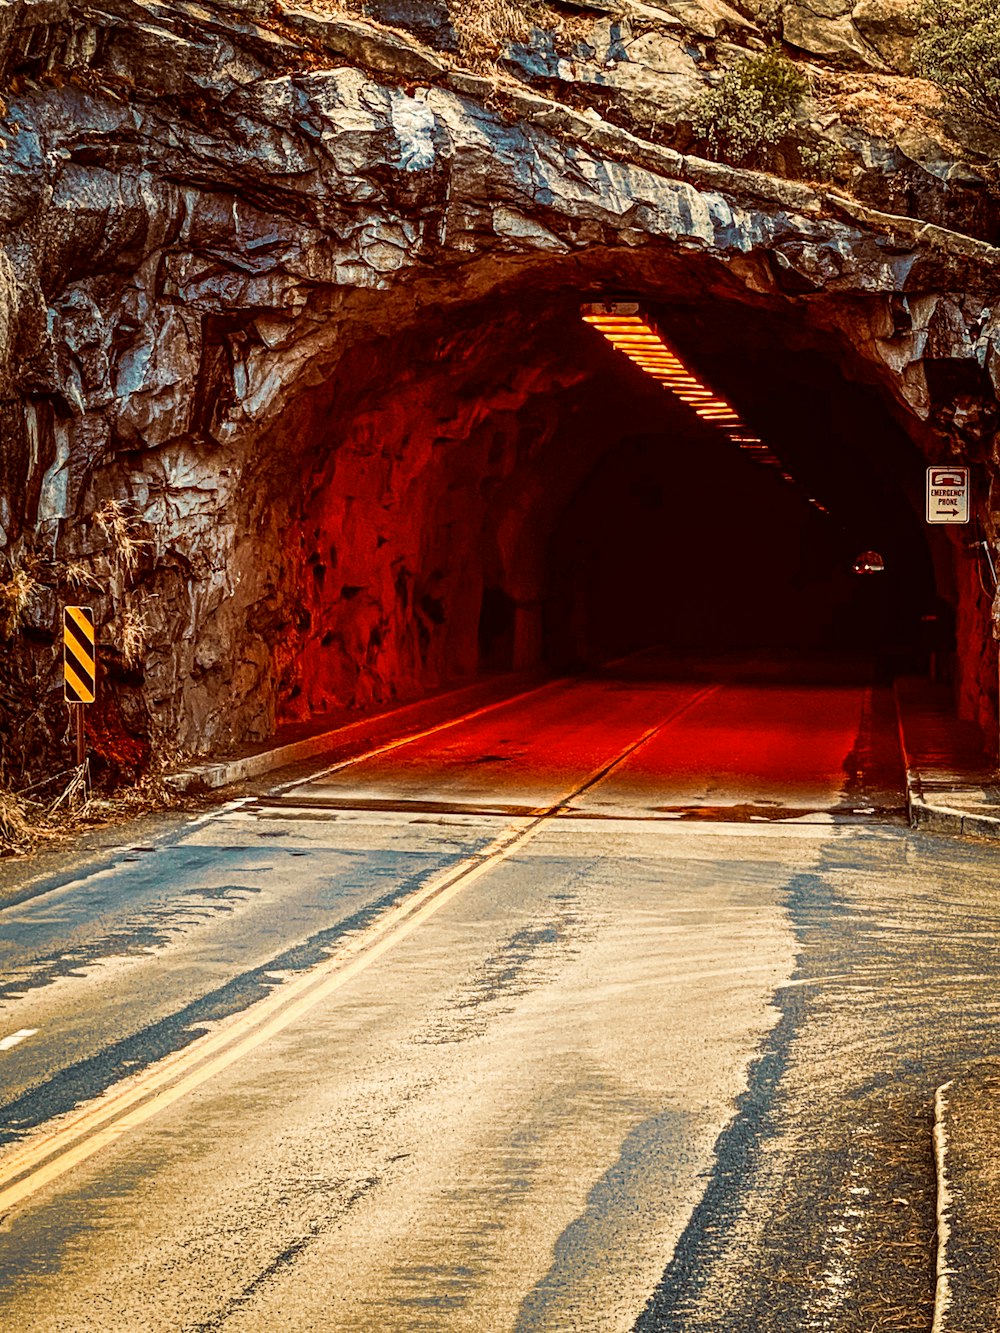 a road going into a tunnel with a red light at the end